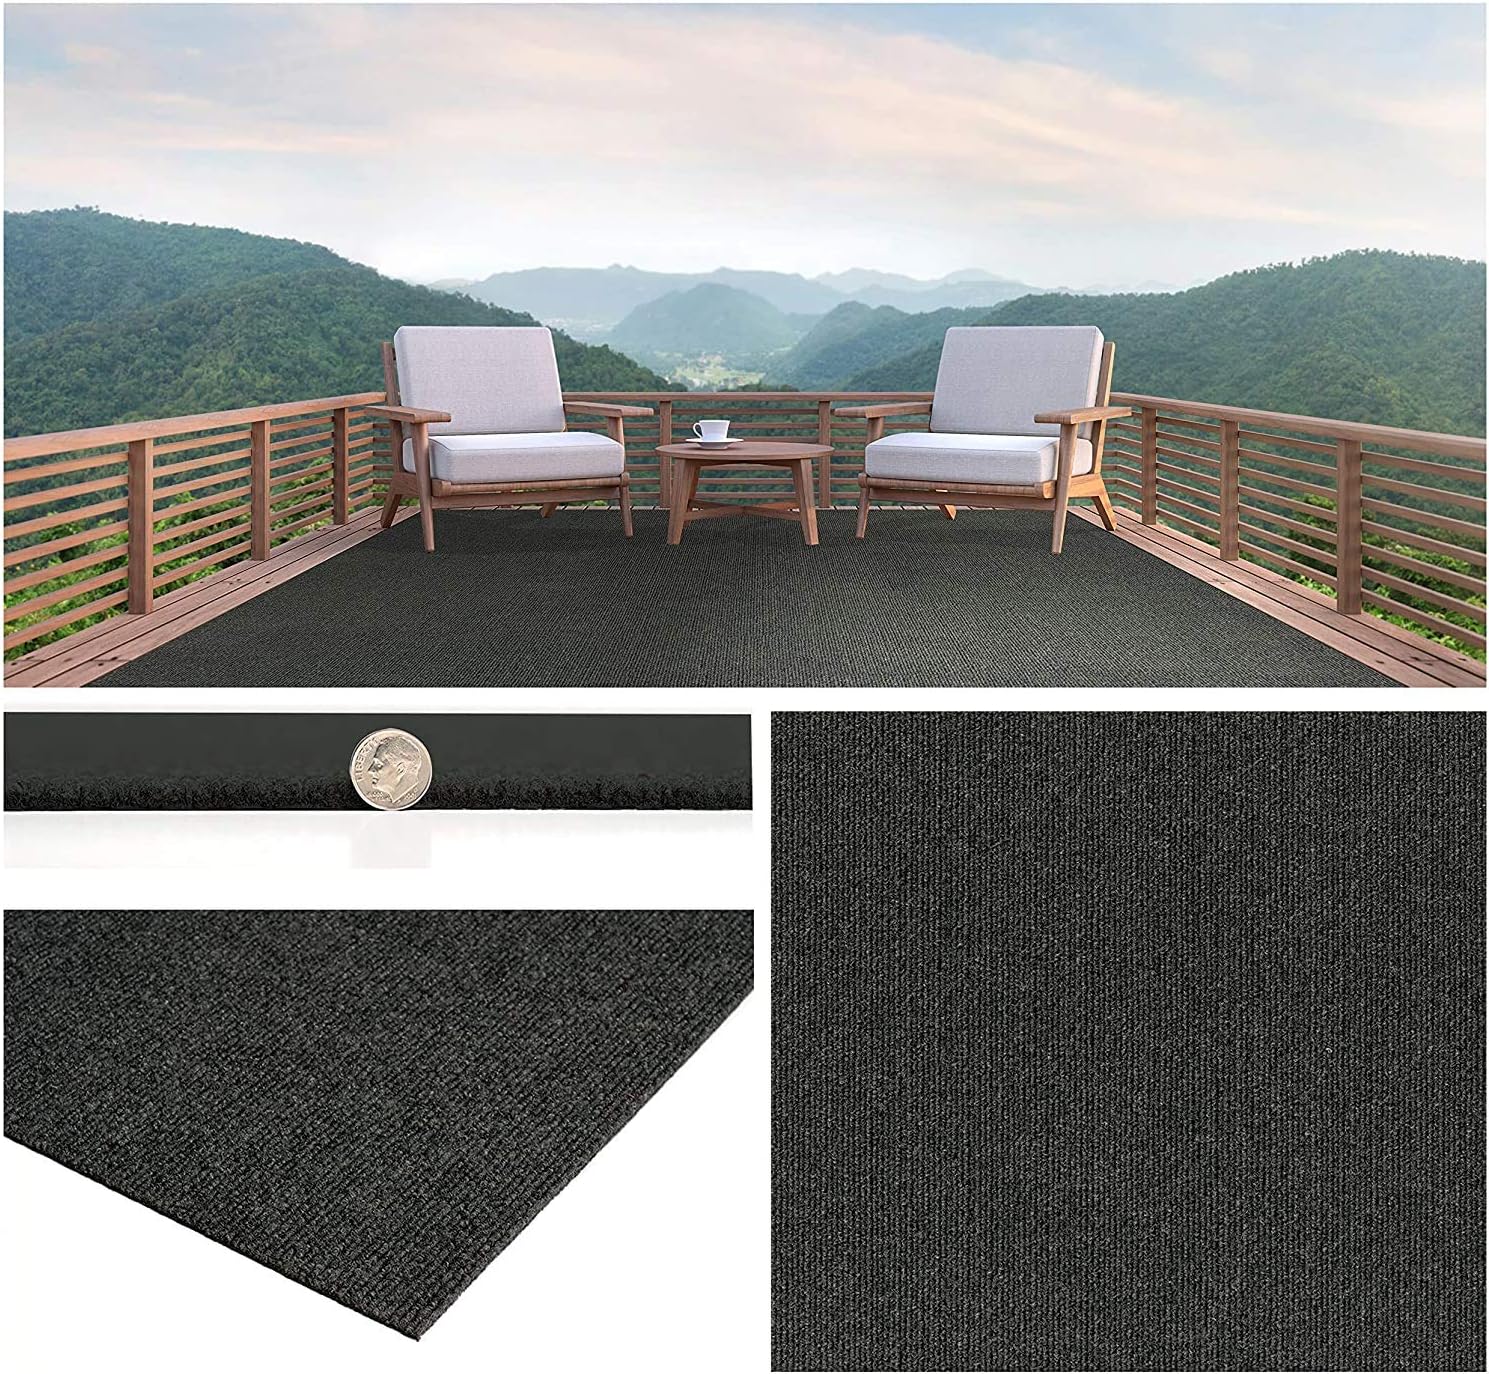 Koeckritz Rugs Durable Outdoor Area, What Are The Softest Rugs Made Of